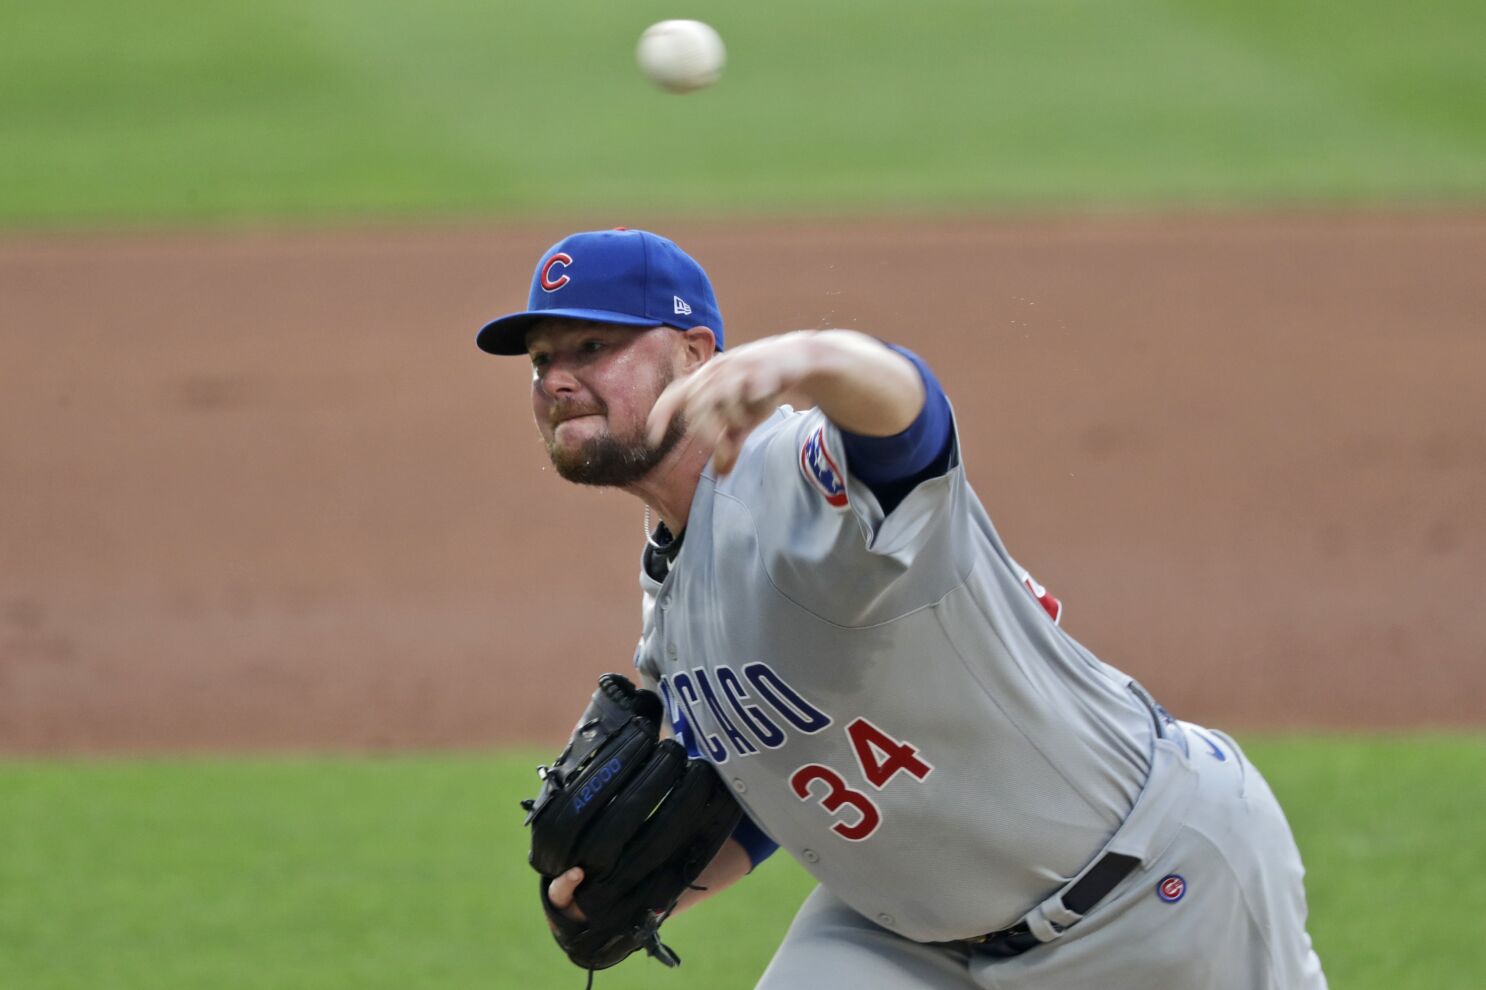 Chicago Cubs will benefit from a comfortable Jon Lester